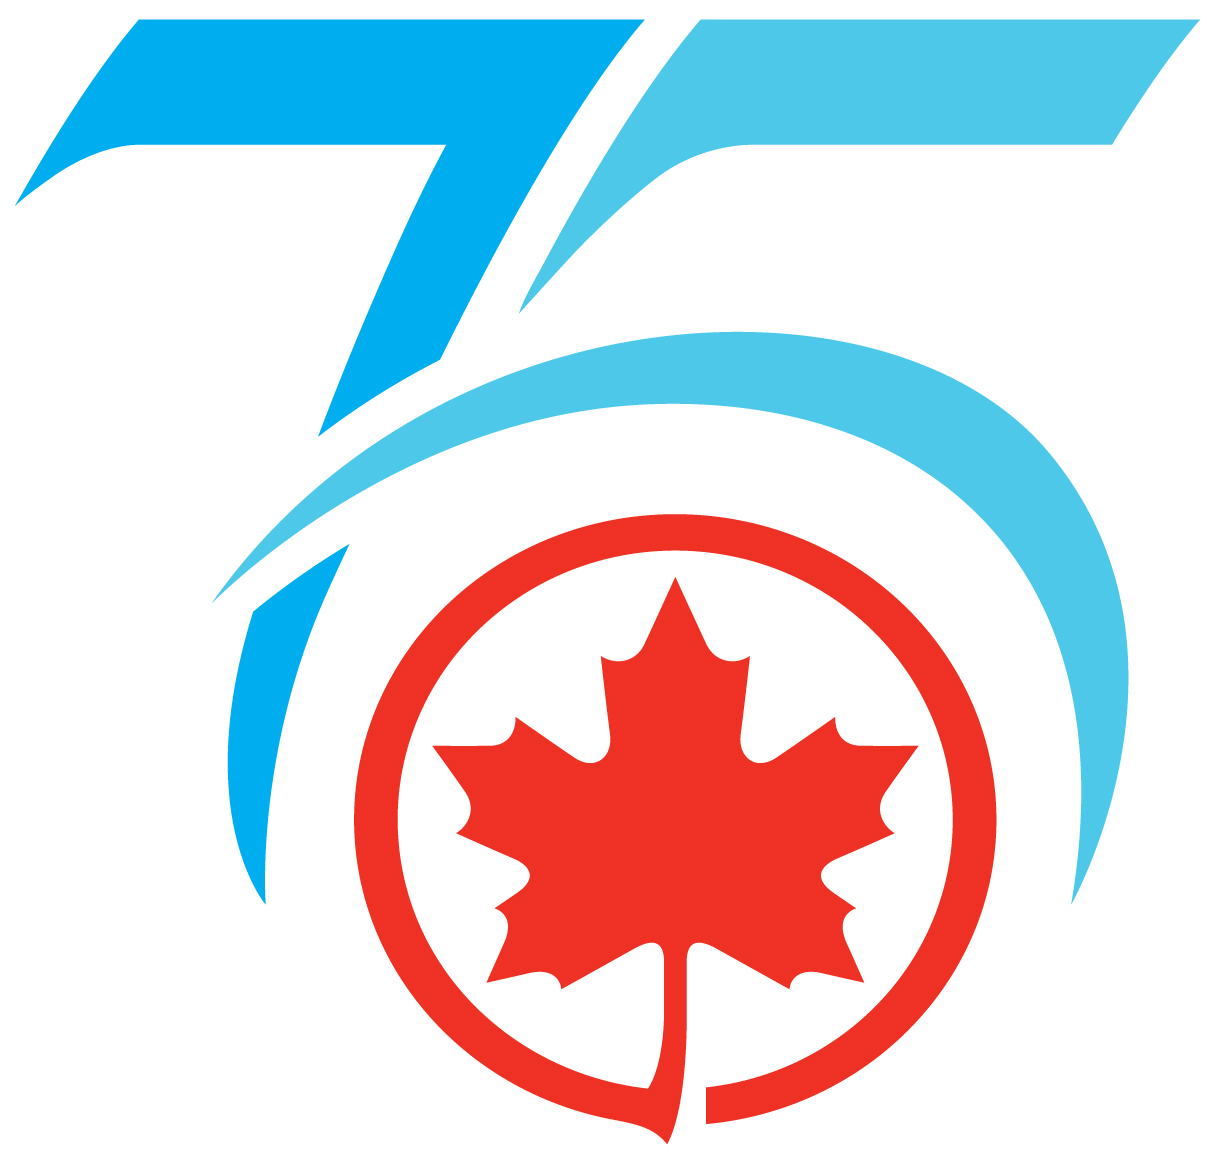 Air Canada celebrates its 75 years with many events